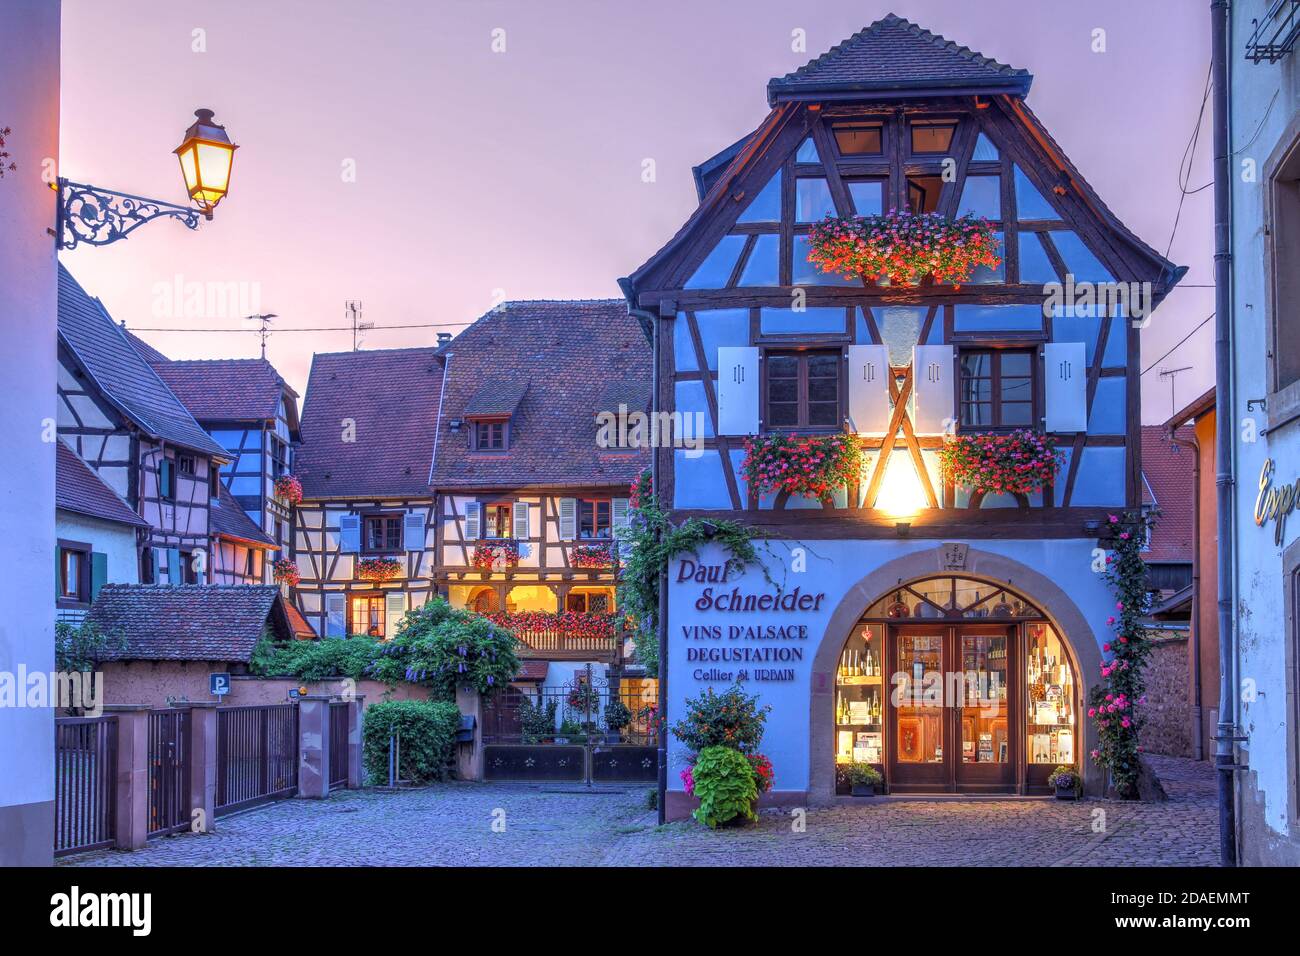 Eguisheim, France - August 10, 2020 - Night scene on the charming streets of Eguisheim, a typical village in the Alsace wine region of France, featuri Stock Photo